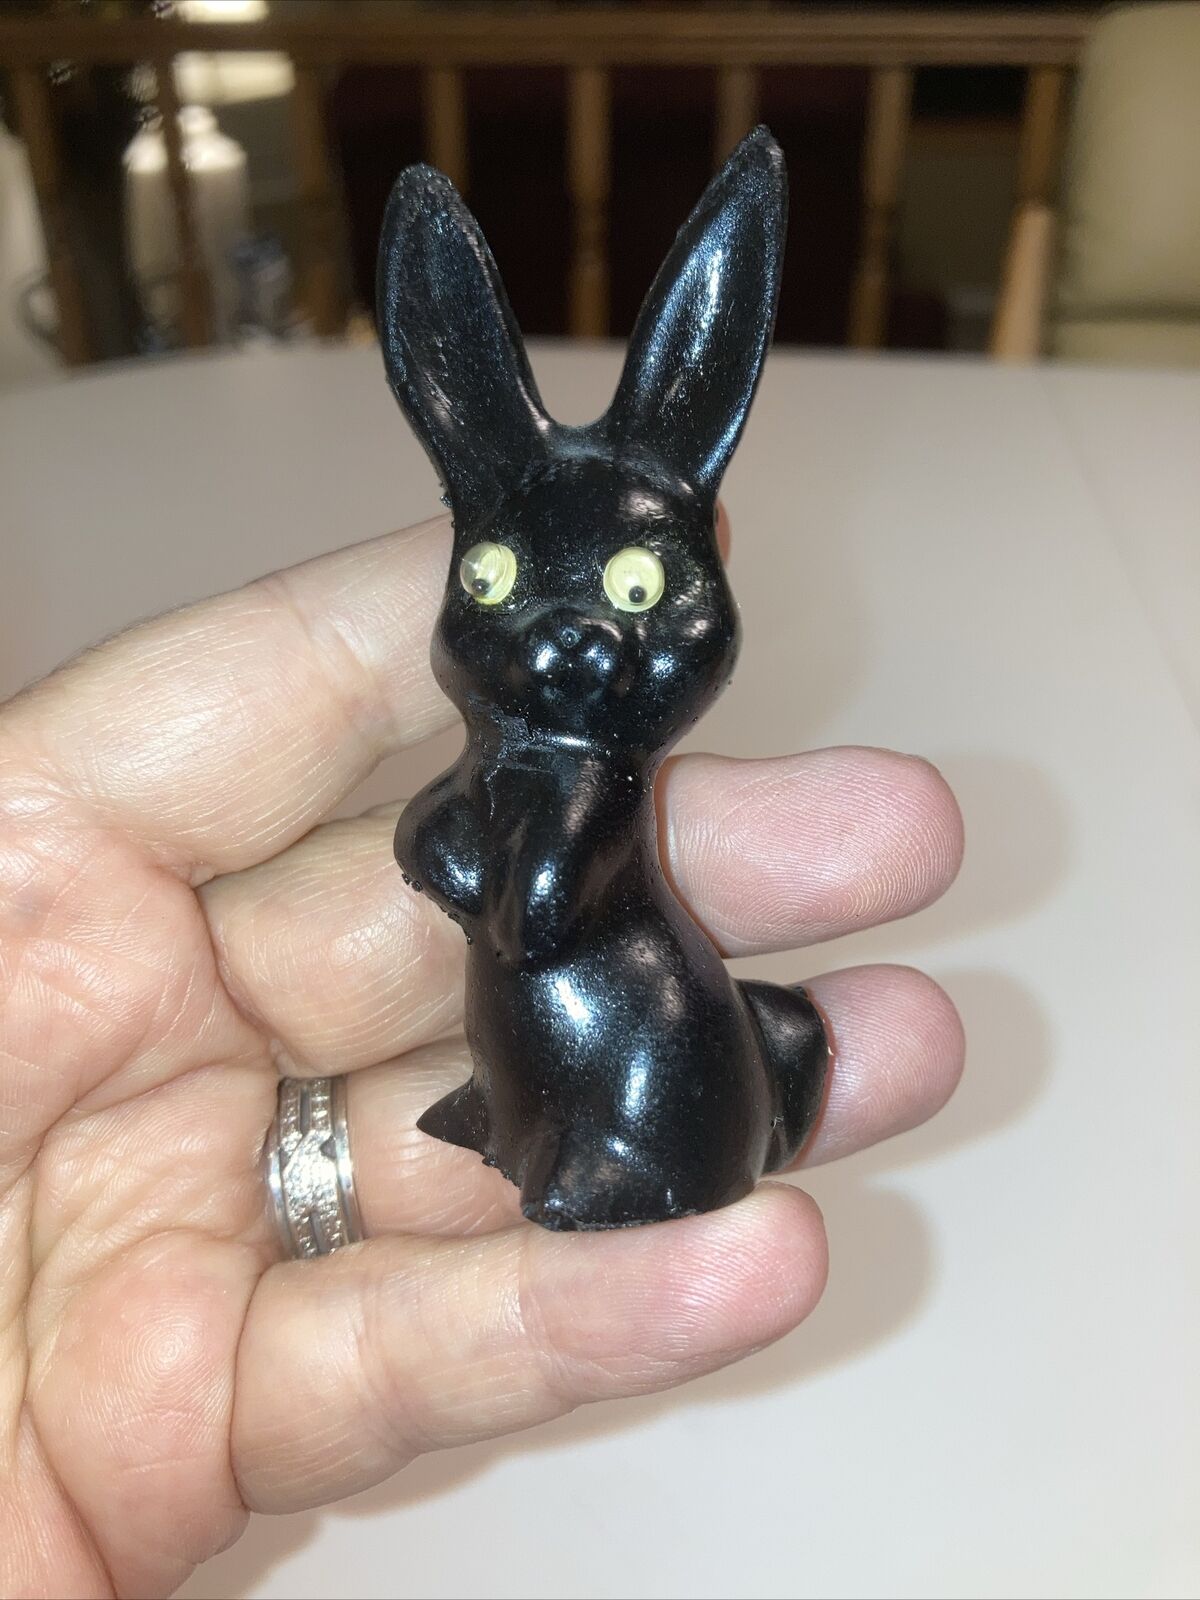 Small Rabbit Figurine Handcrafted From Coal - Unique